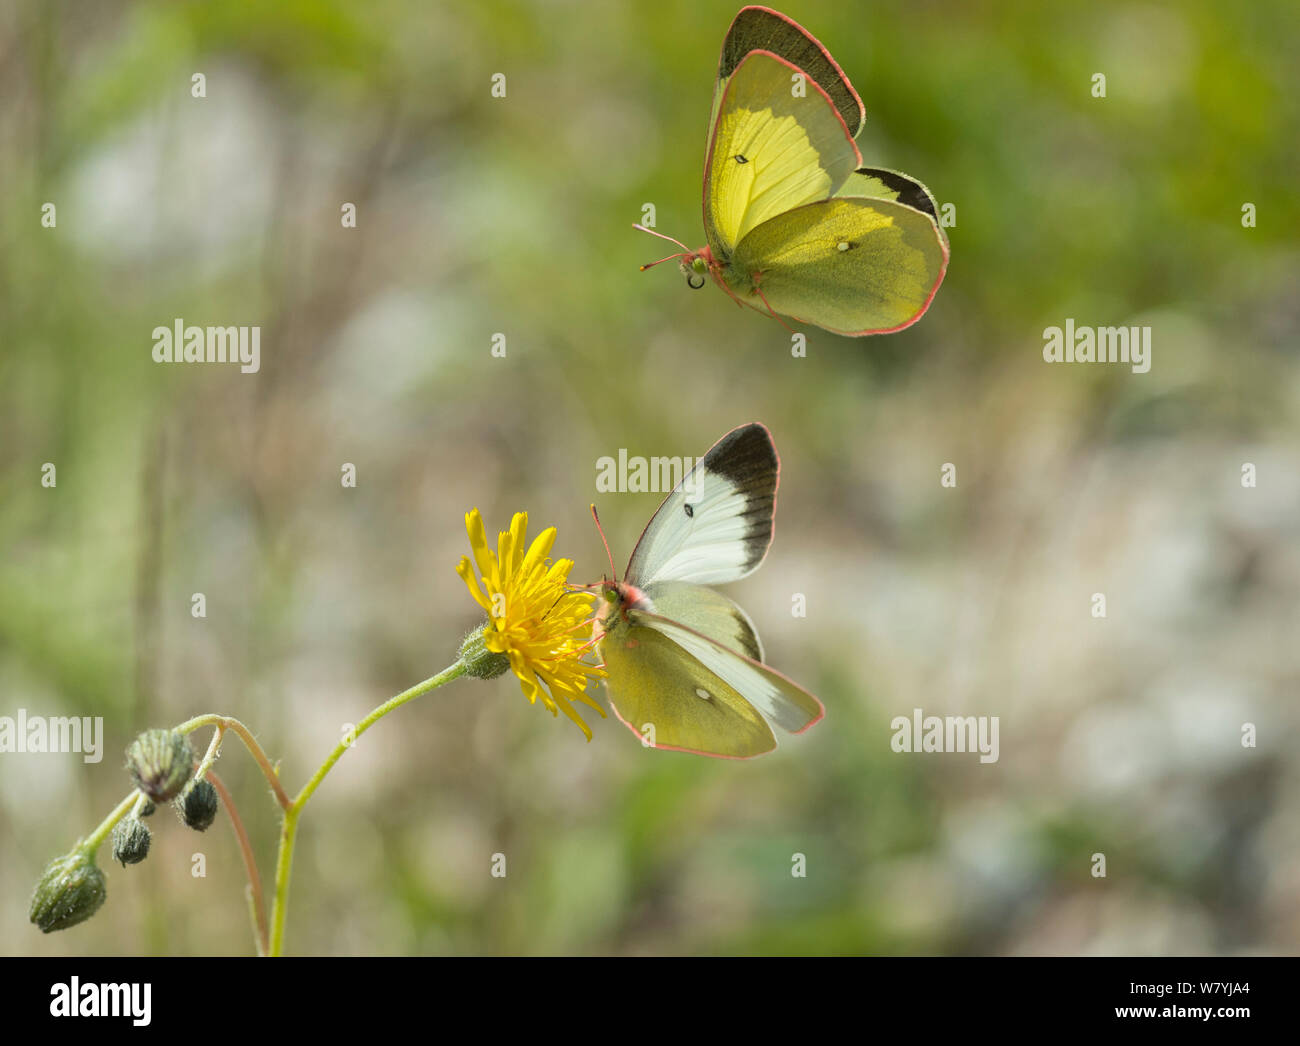 Moorland clouded yellow butterfly (Colias palaeno) one feeding on flower and one in flight, Lieksa, Pohjois-Karjala / North Karelia, Finland, June. Stock Photo